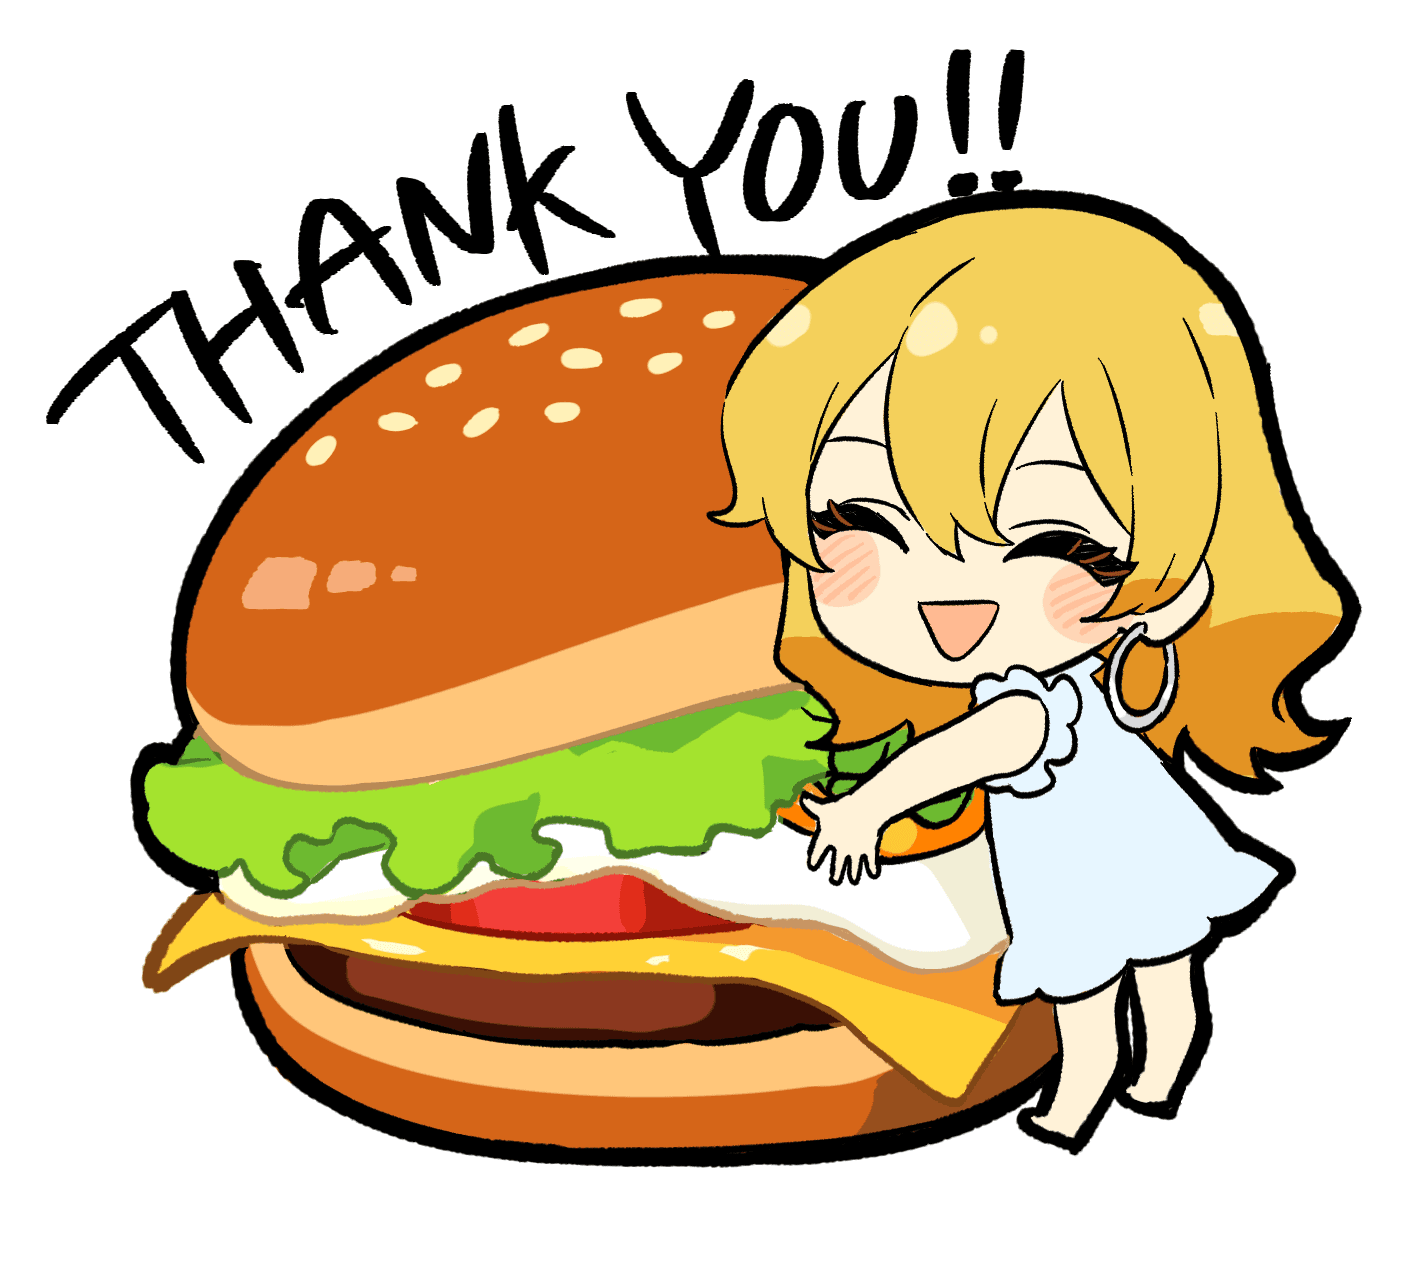 Thank You from Burger Girl!